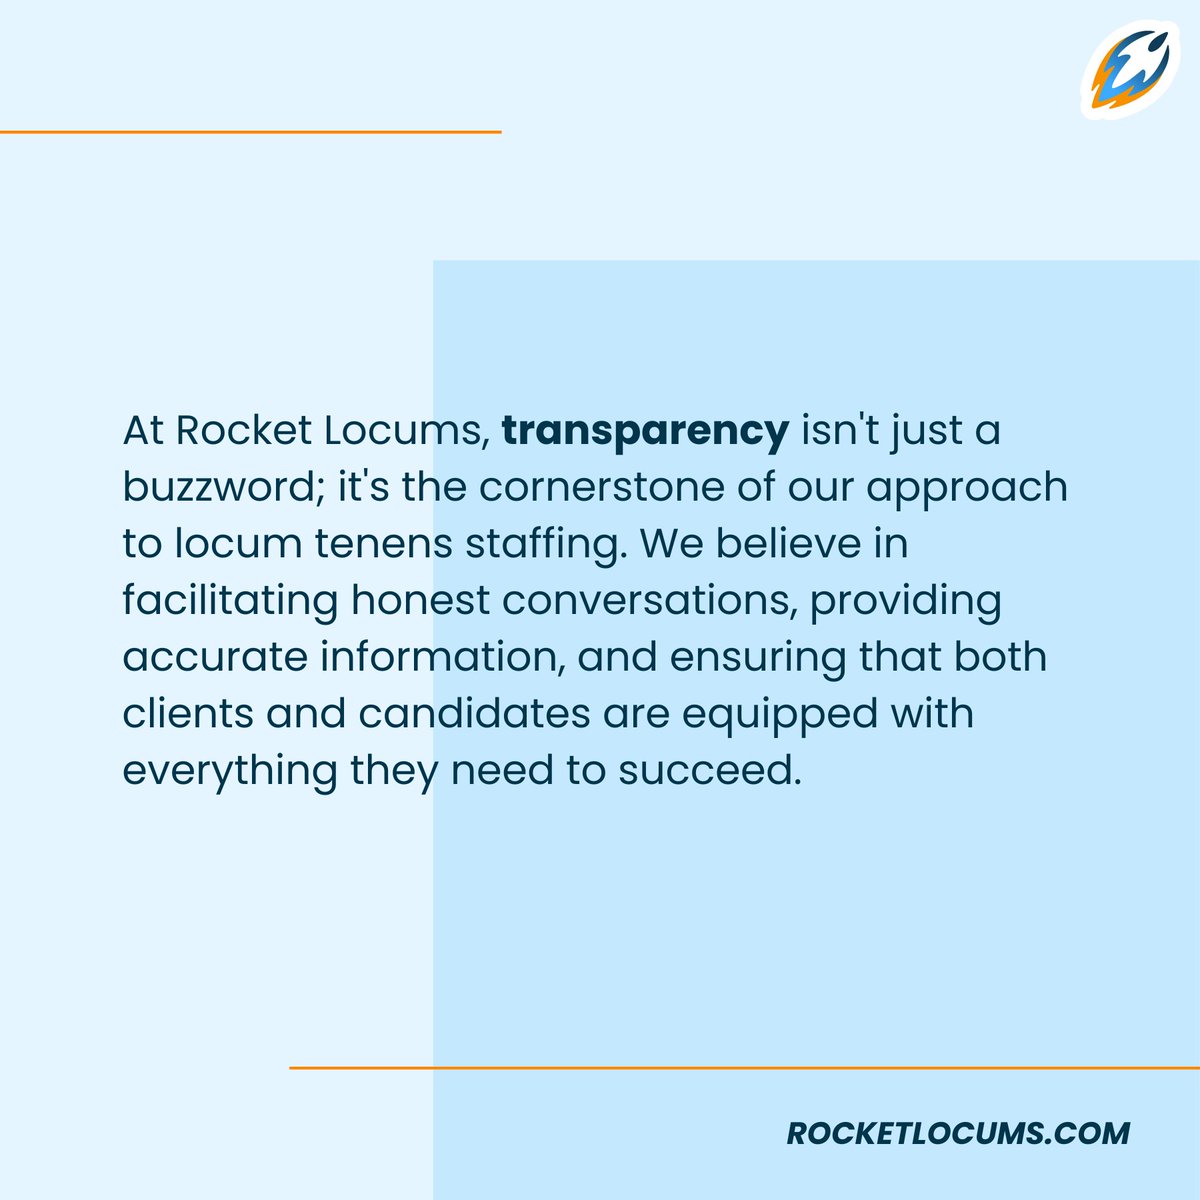 Transparency is extremely important to us, and it should be important to you too!

Try Rocket Locums today to take your schedule back!

#RocketLocums #HealthcareHeroes #CRNAJobs #LocumTenens #NursingCareer #HealthcareOpportunities #NursingJobs #JoinOurCommunity #LocumTenens